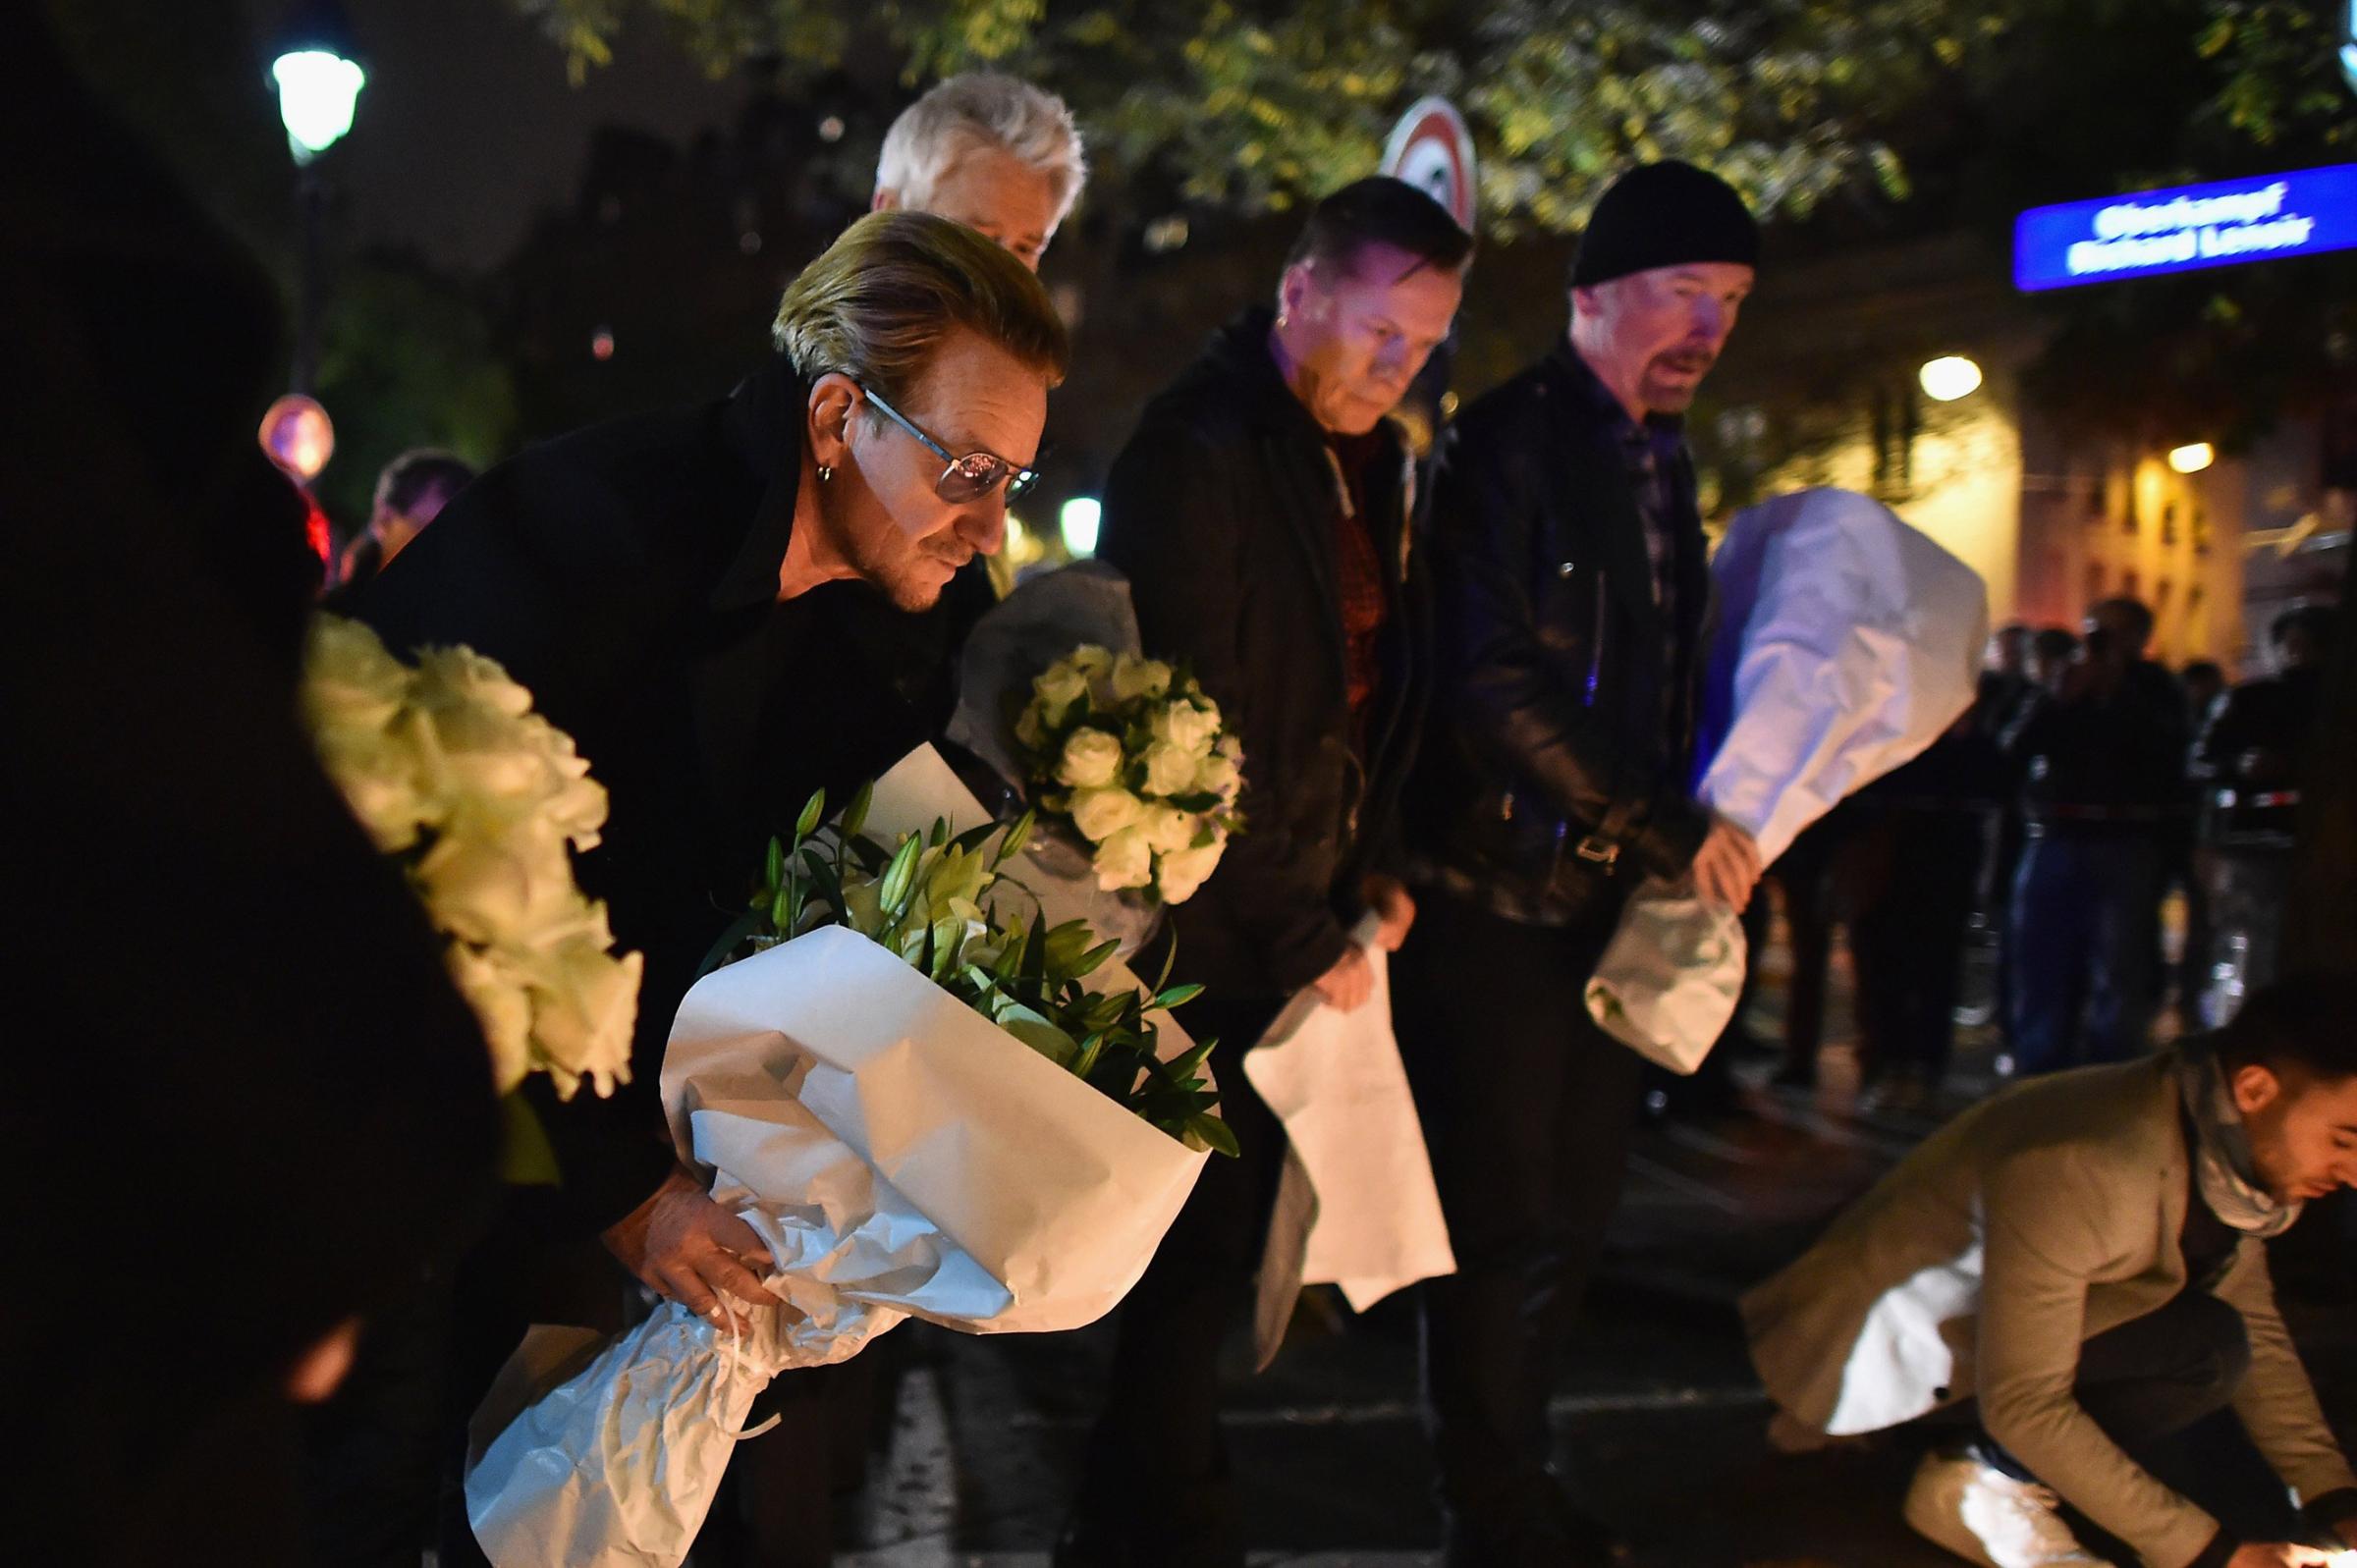 Bono and band members from the band U2 place flowers on the pavement near the scene of yesterday's Bataclan Theatre terrorist attack on Nov. 14, 2015 in Paris.